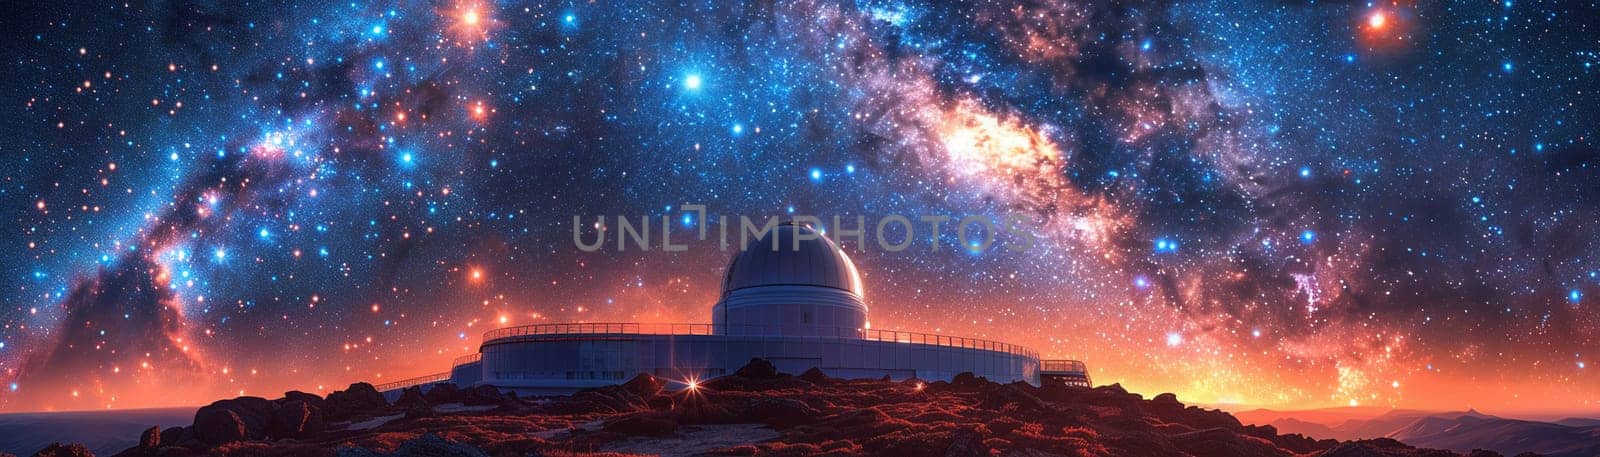 Observatory Sky Dome Unlocks Galactic Mysteries in Business of Astronomical Research, Night sky charts and observation decks unlock a story of galactic mysteries and astronomical research in the observatory sky dome business.